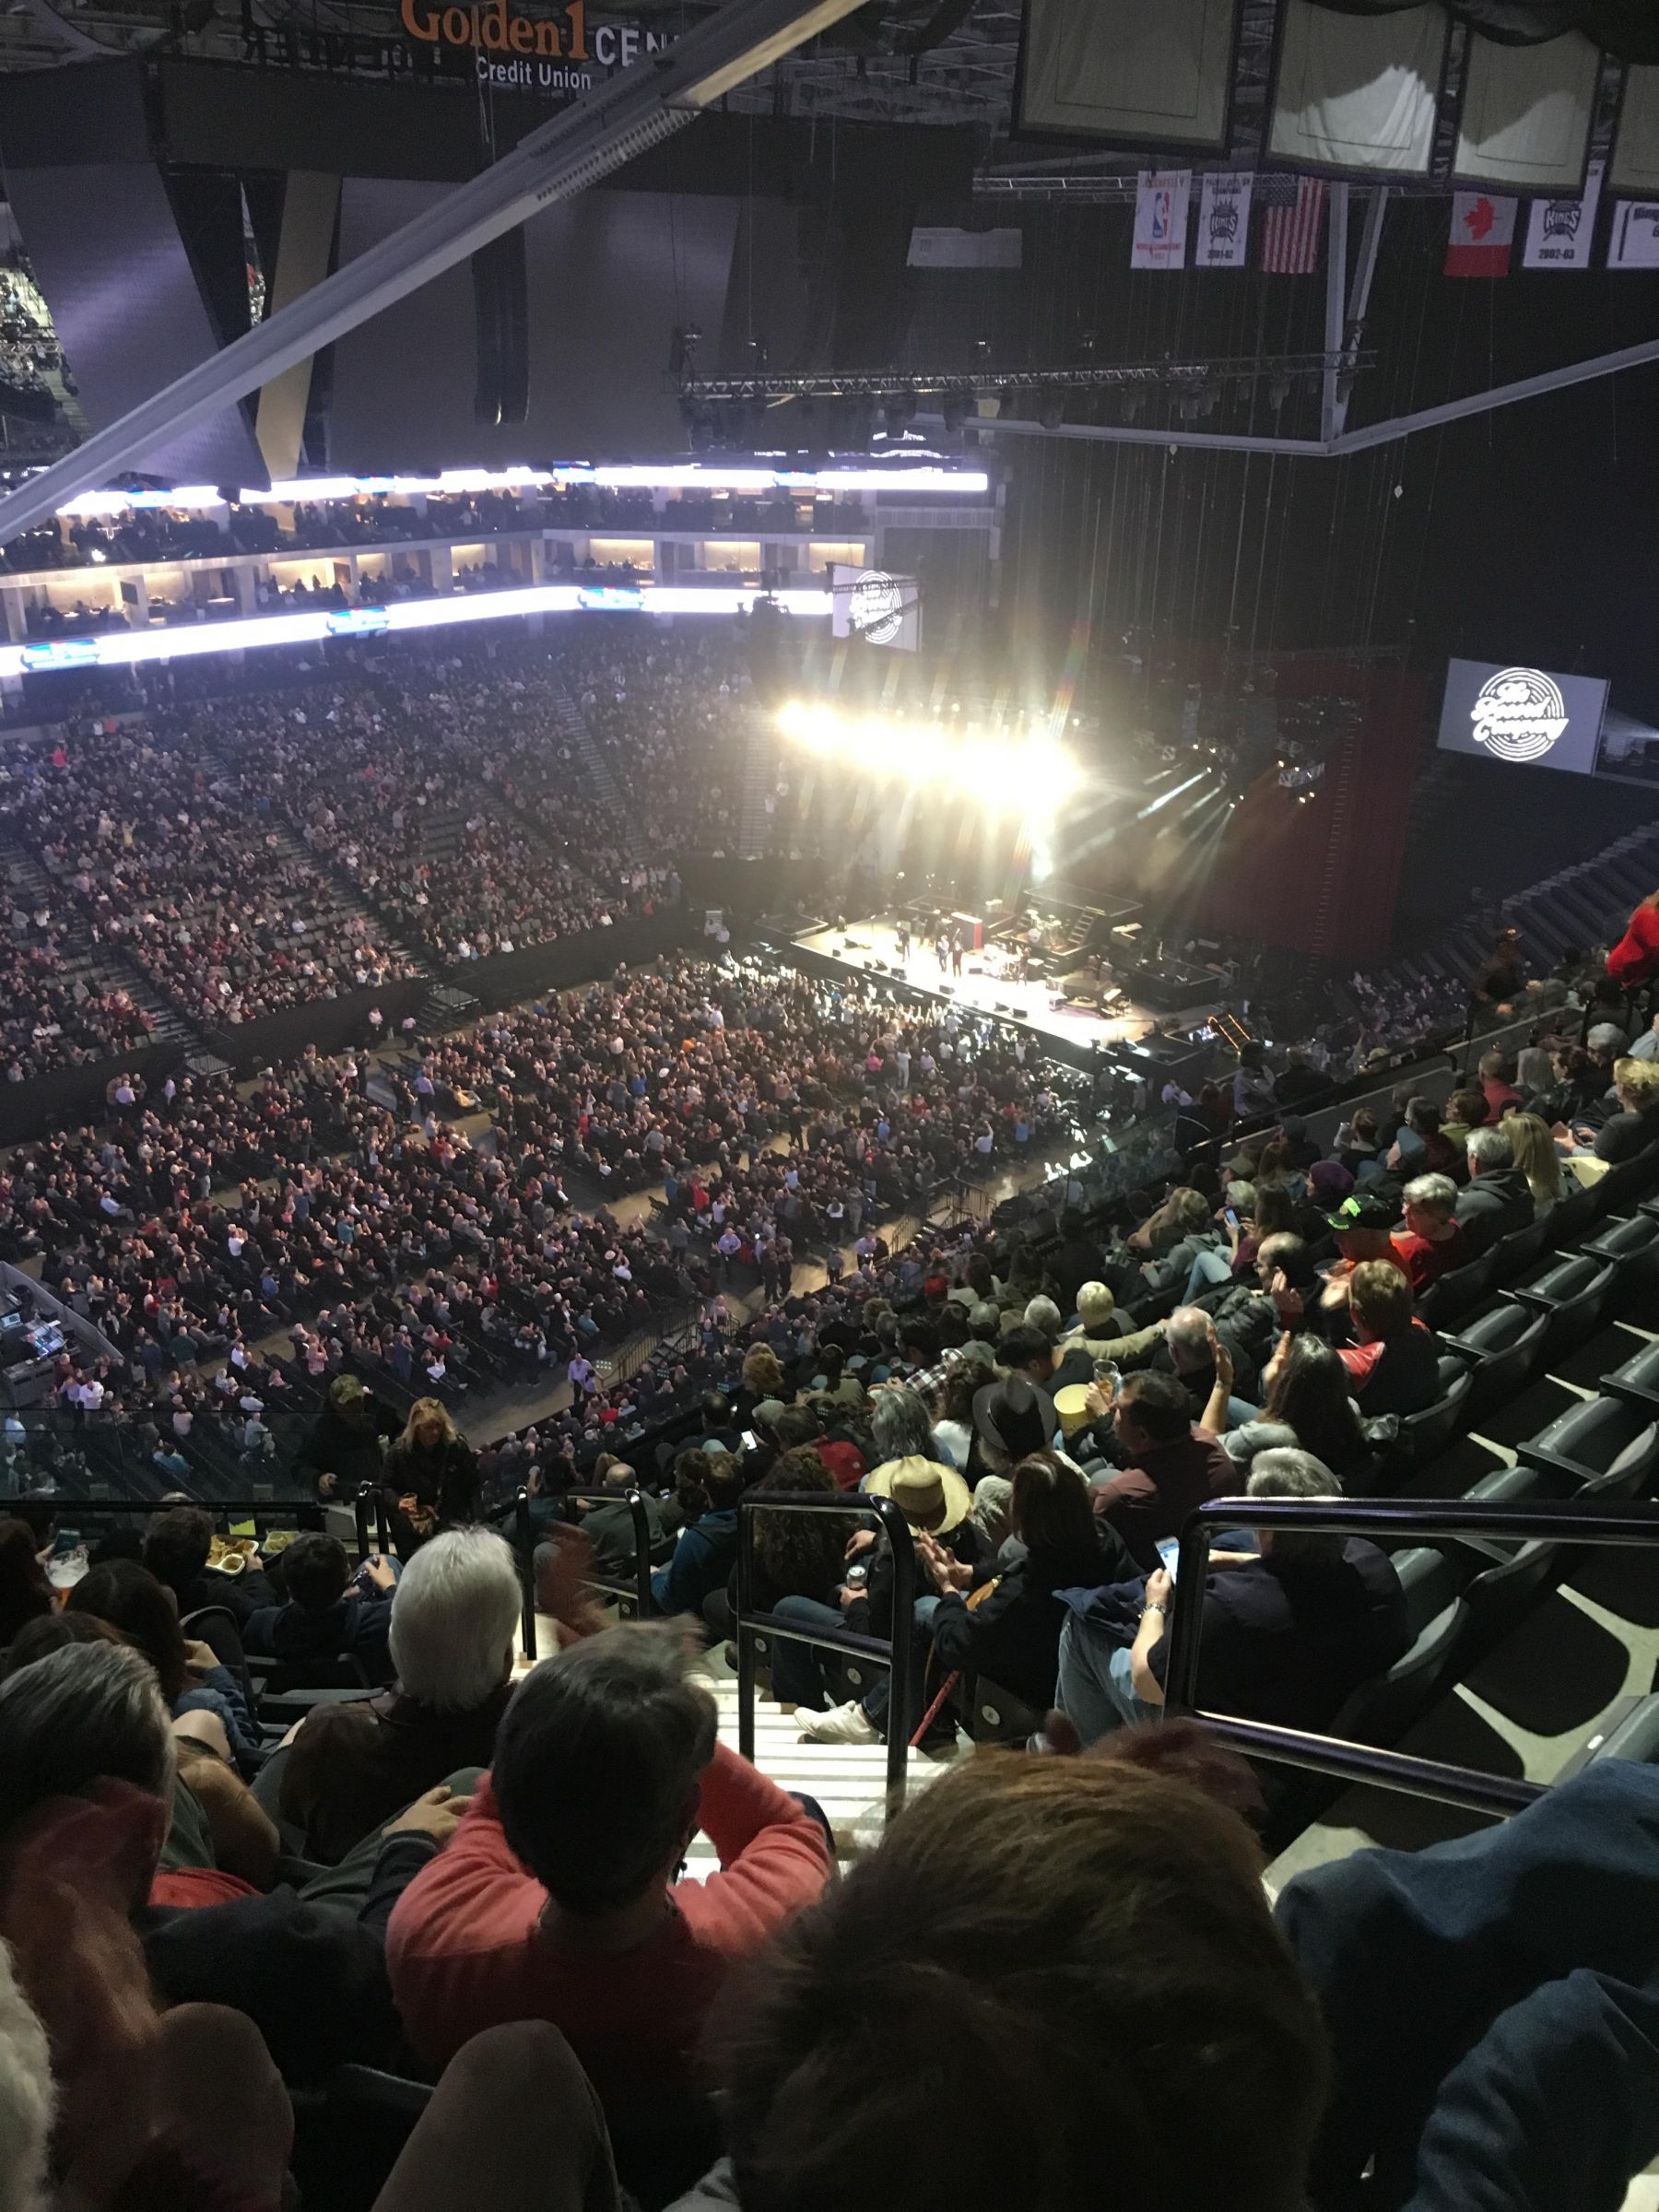 section 208, row q seat view  for concert - golden 1 center